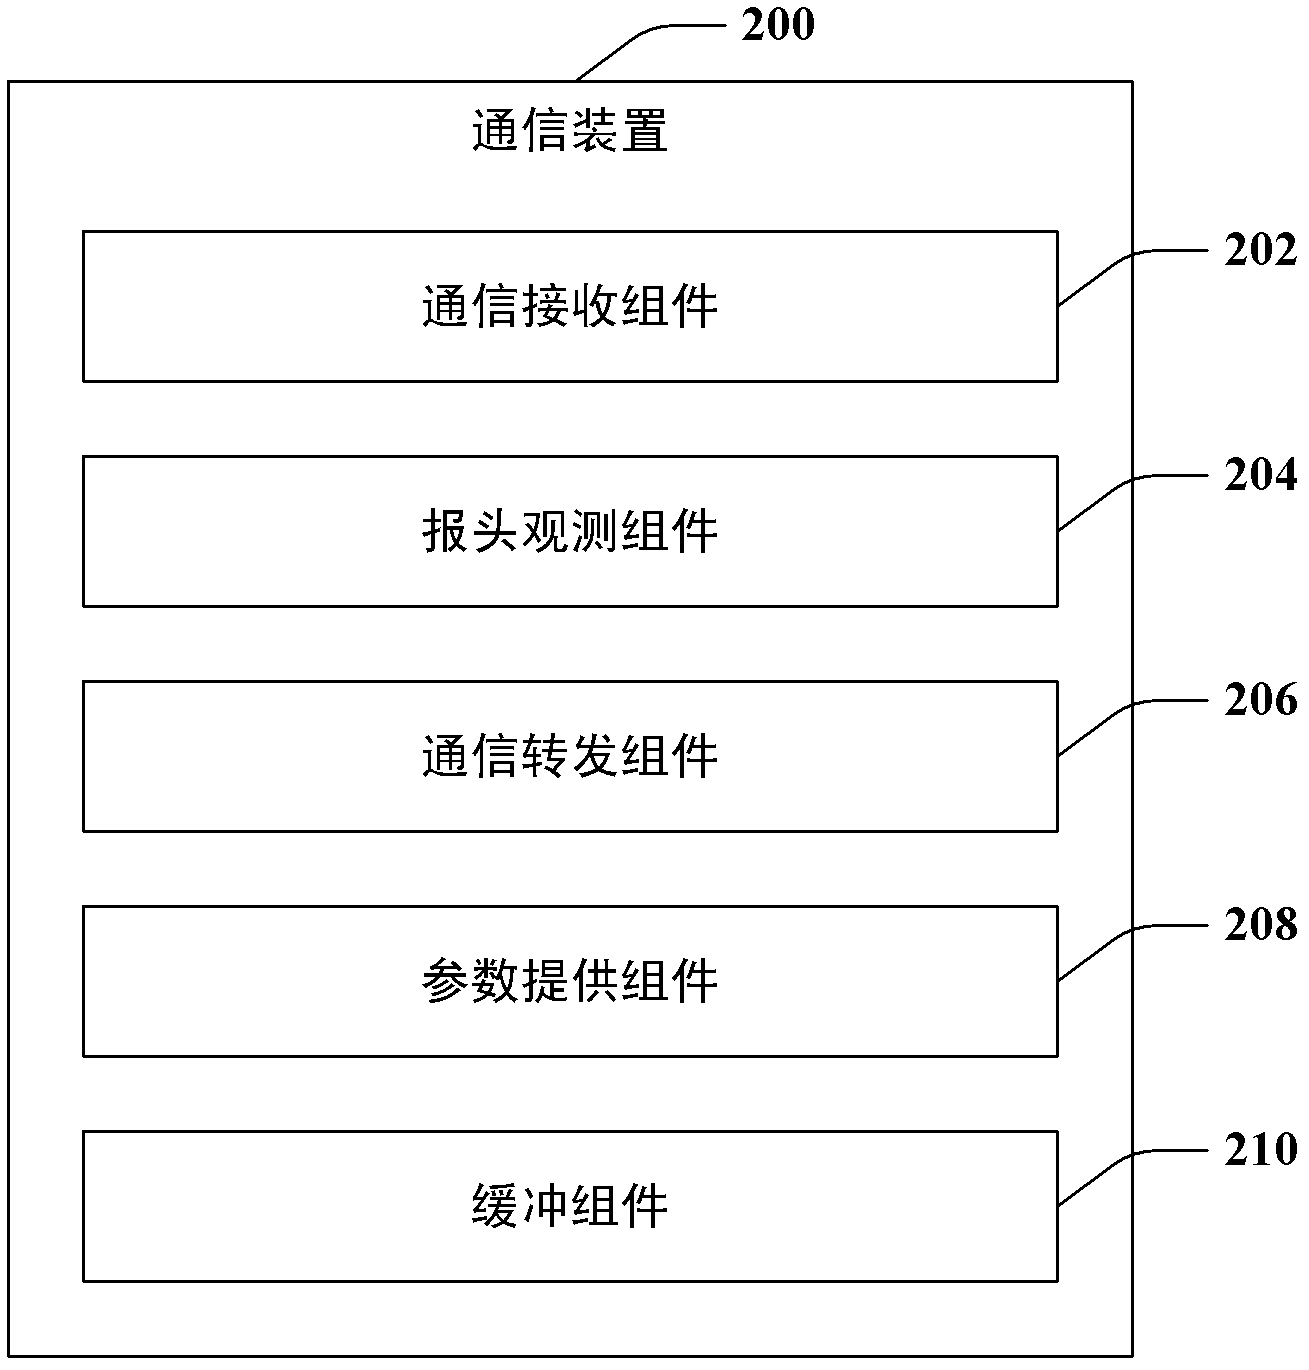 Device mobility for split-cell relay networks